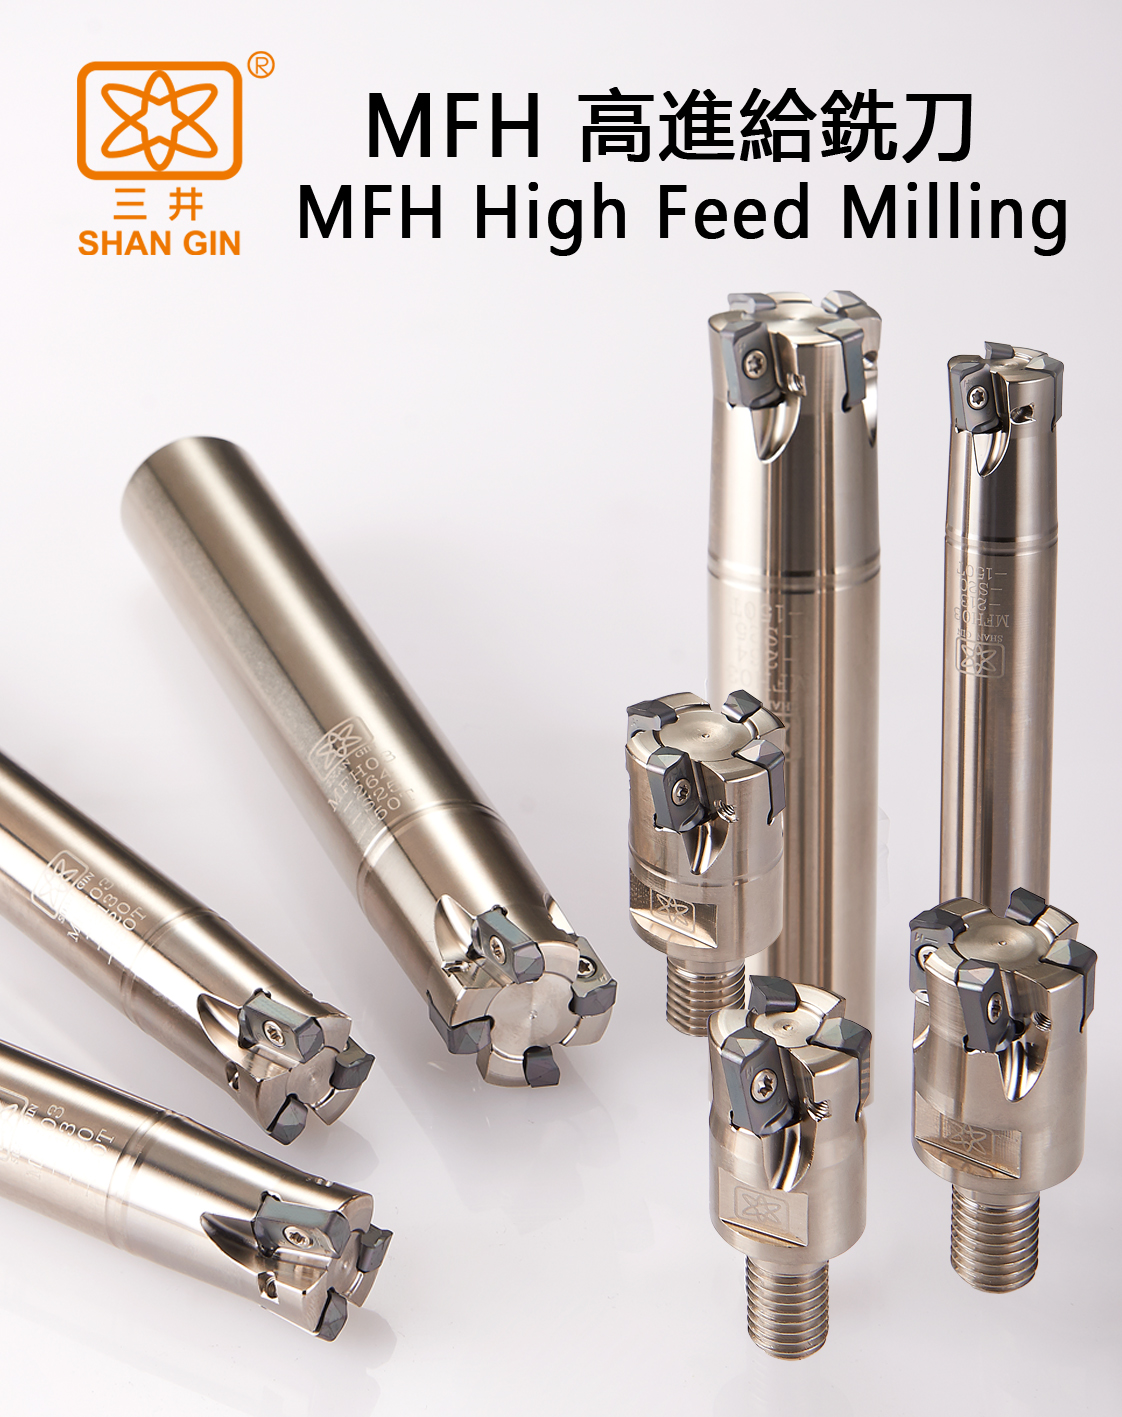 Products|MFH High Feed Milling